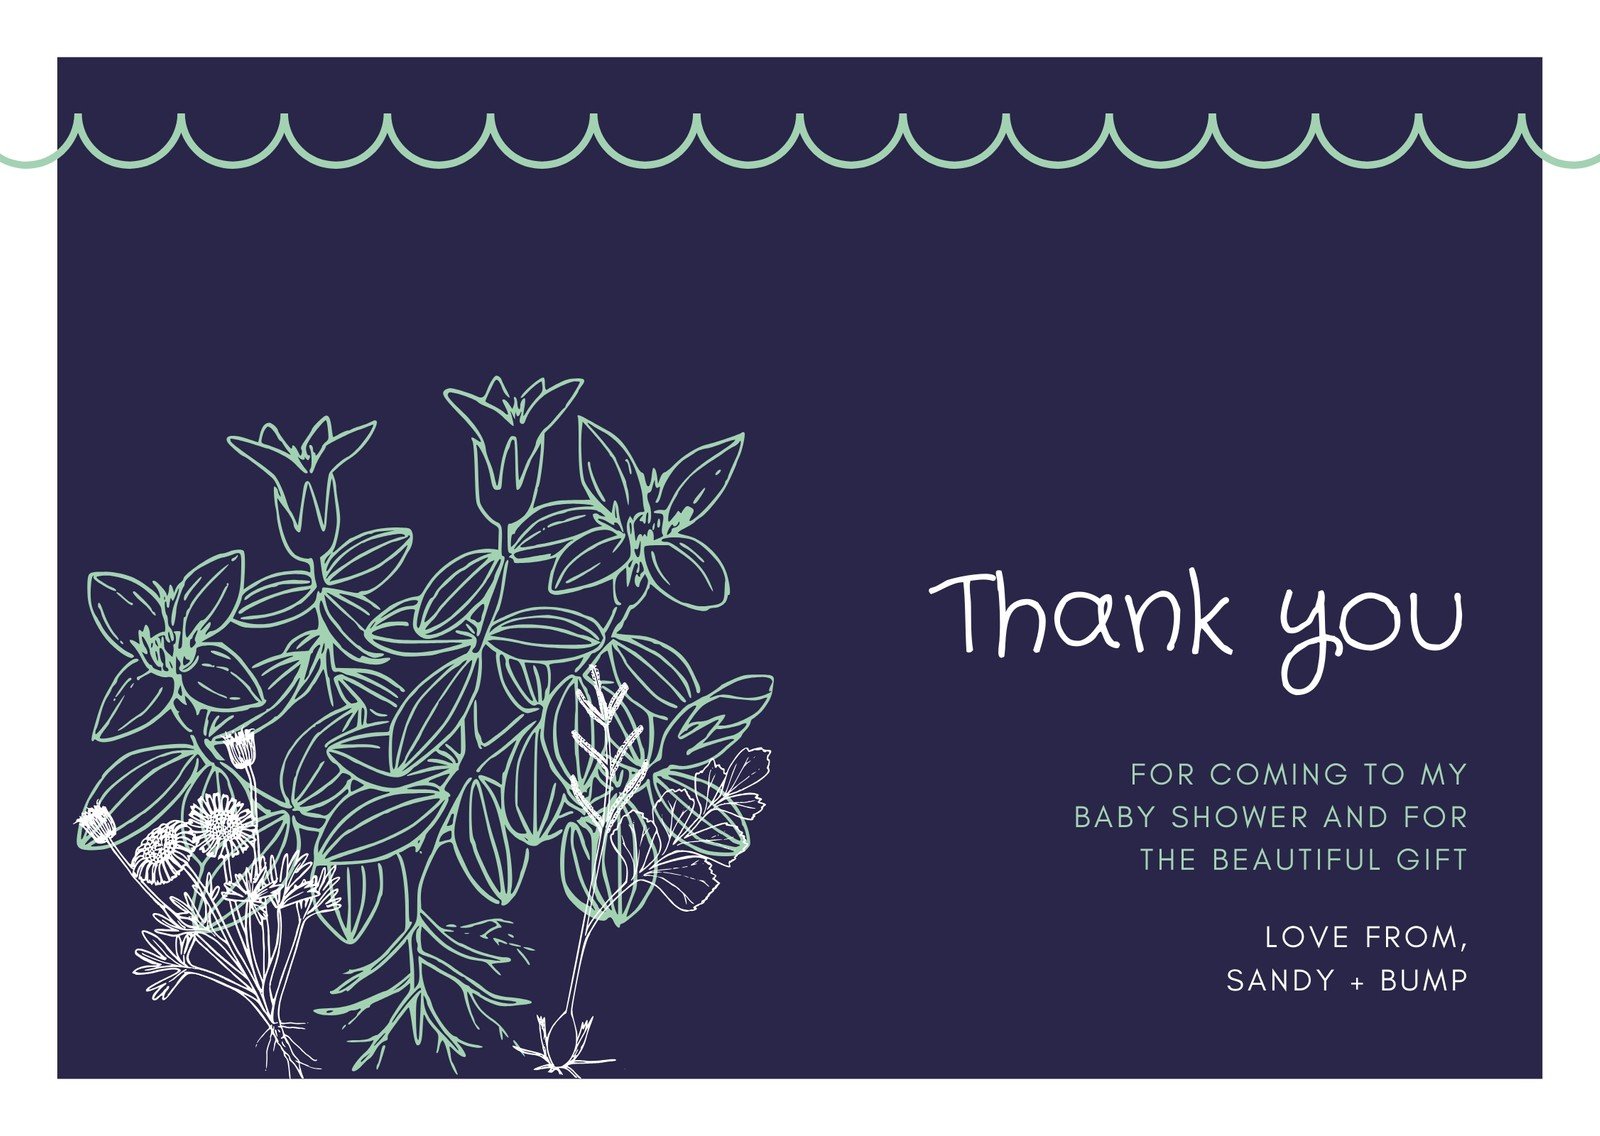 Customize 20+ Baby Shower Thank You Cards Templates Online - Canva Regarding Thank You Card Template For Baby Shower